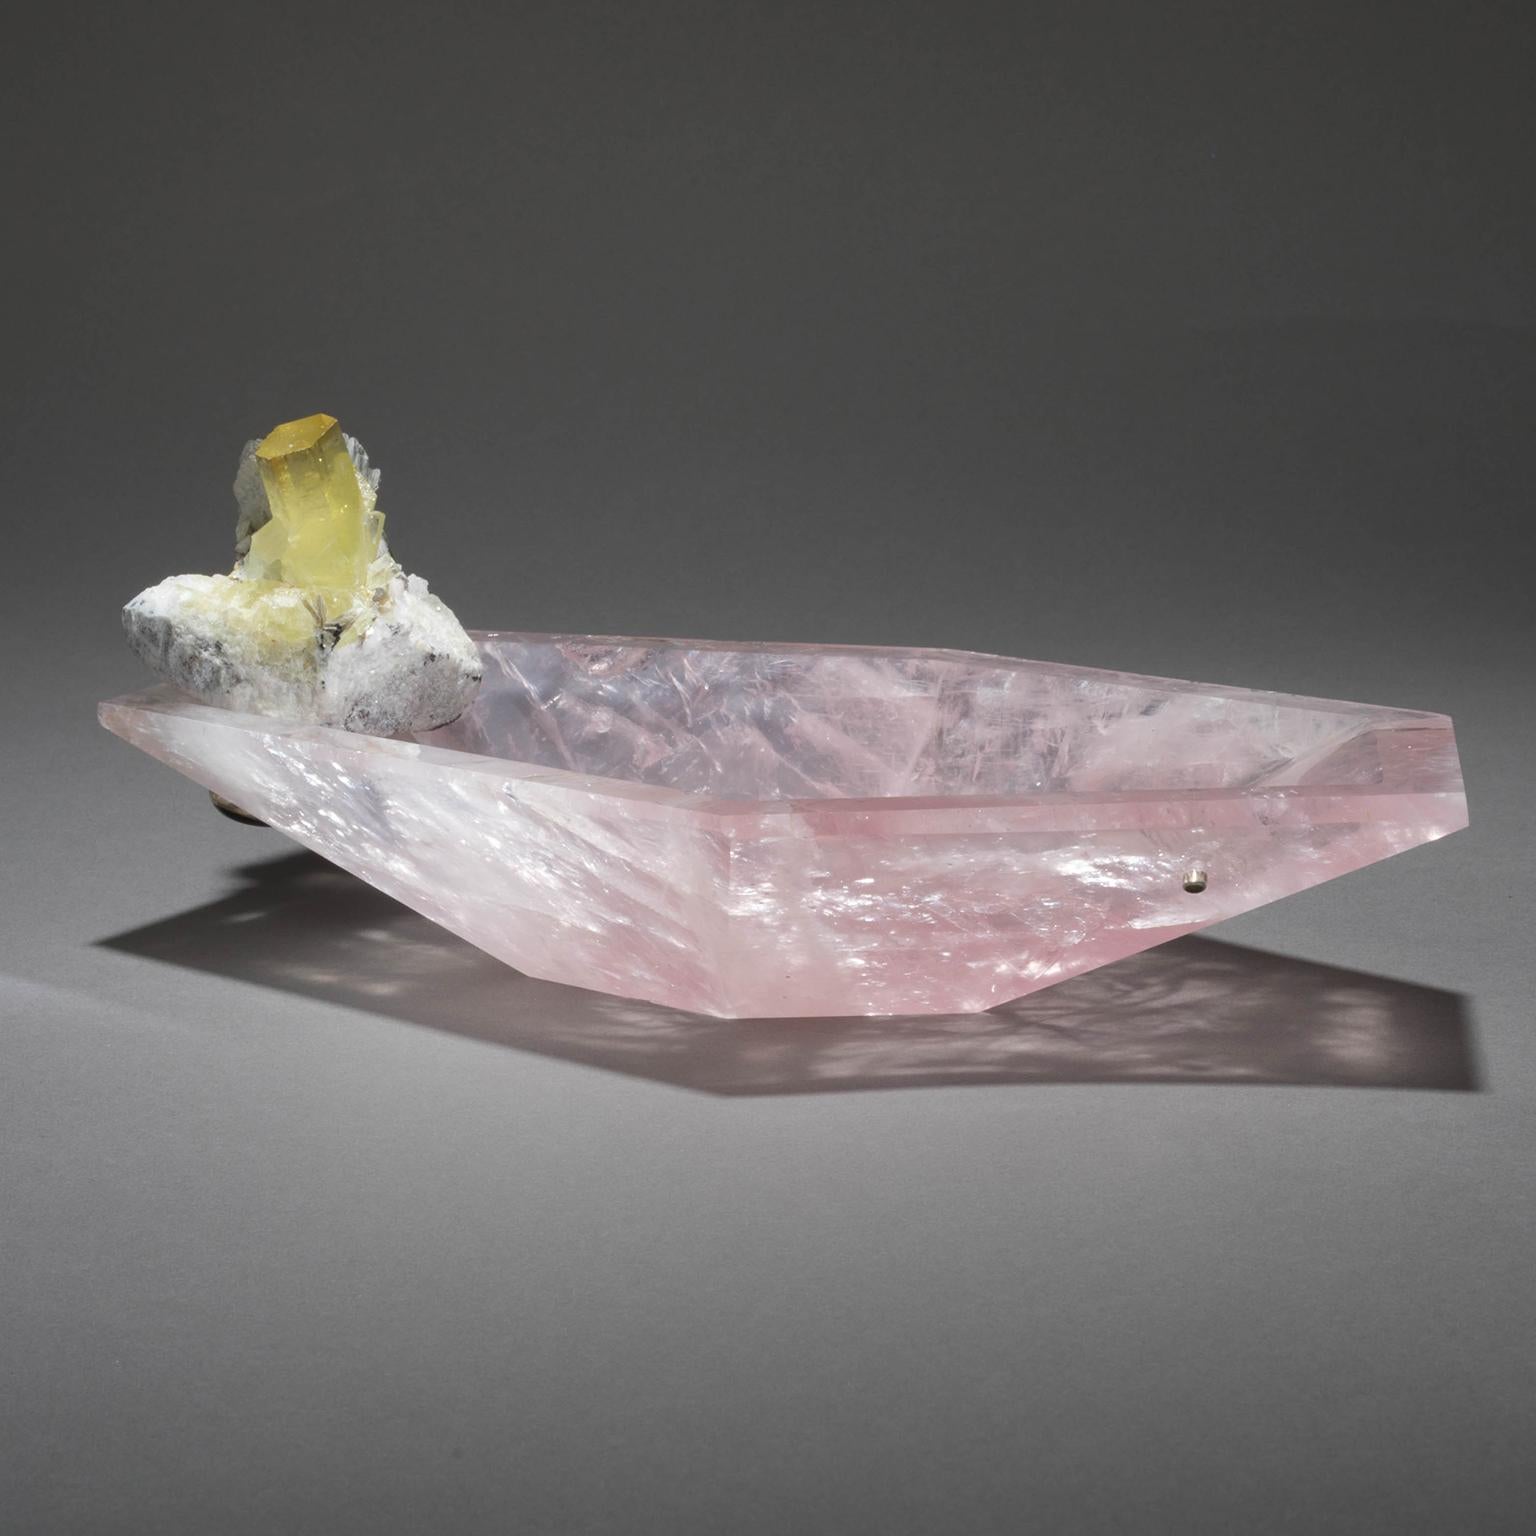 Crystal Bling Bowl 6
Studio Greytak’s Crystal Bling Bowl 6 shines like the dawn of a new day. Sunny columns of golden beryl rise over a single-cut bowl of bright rose quartz while sparkling rays of muscovite, said to hold a lifetime of earned